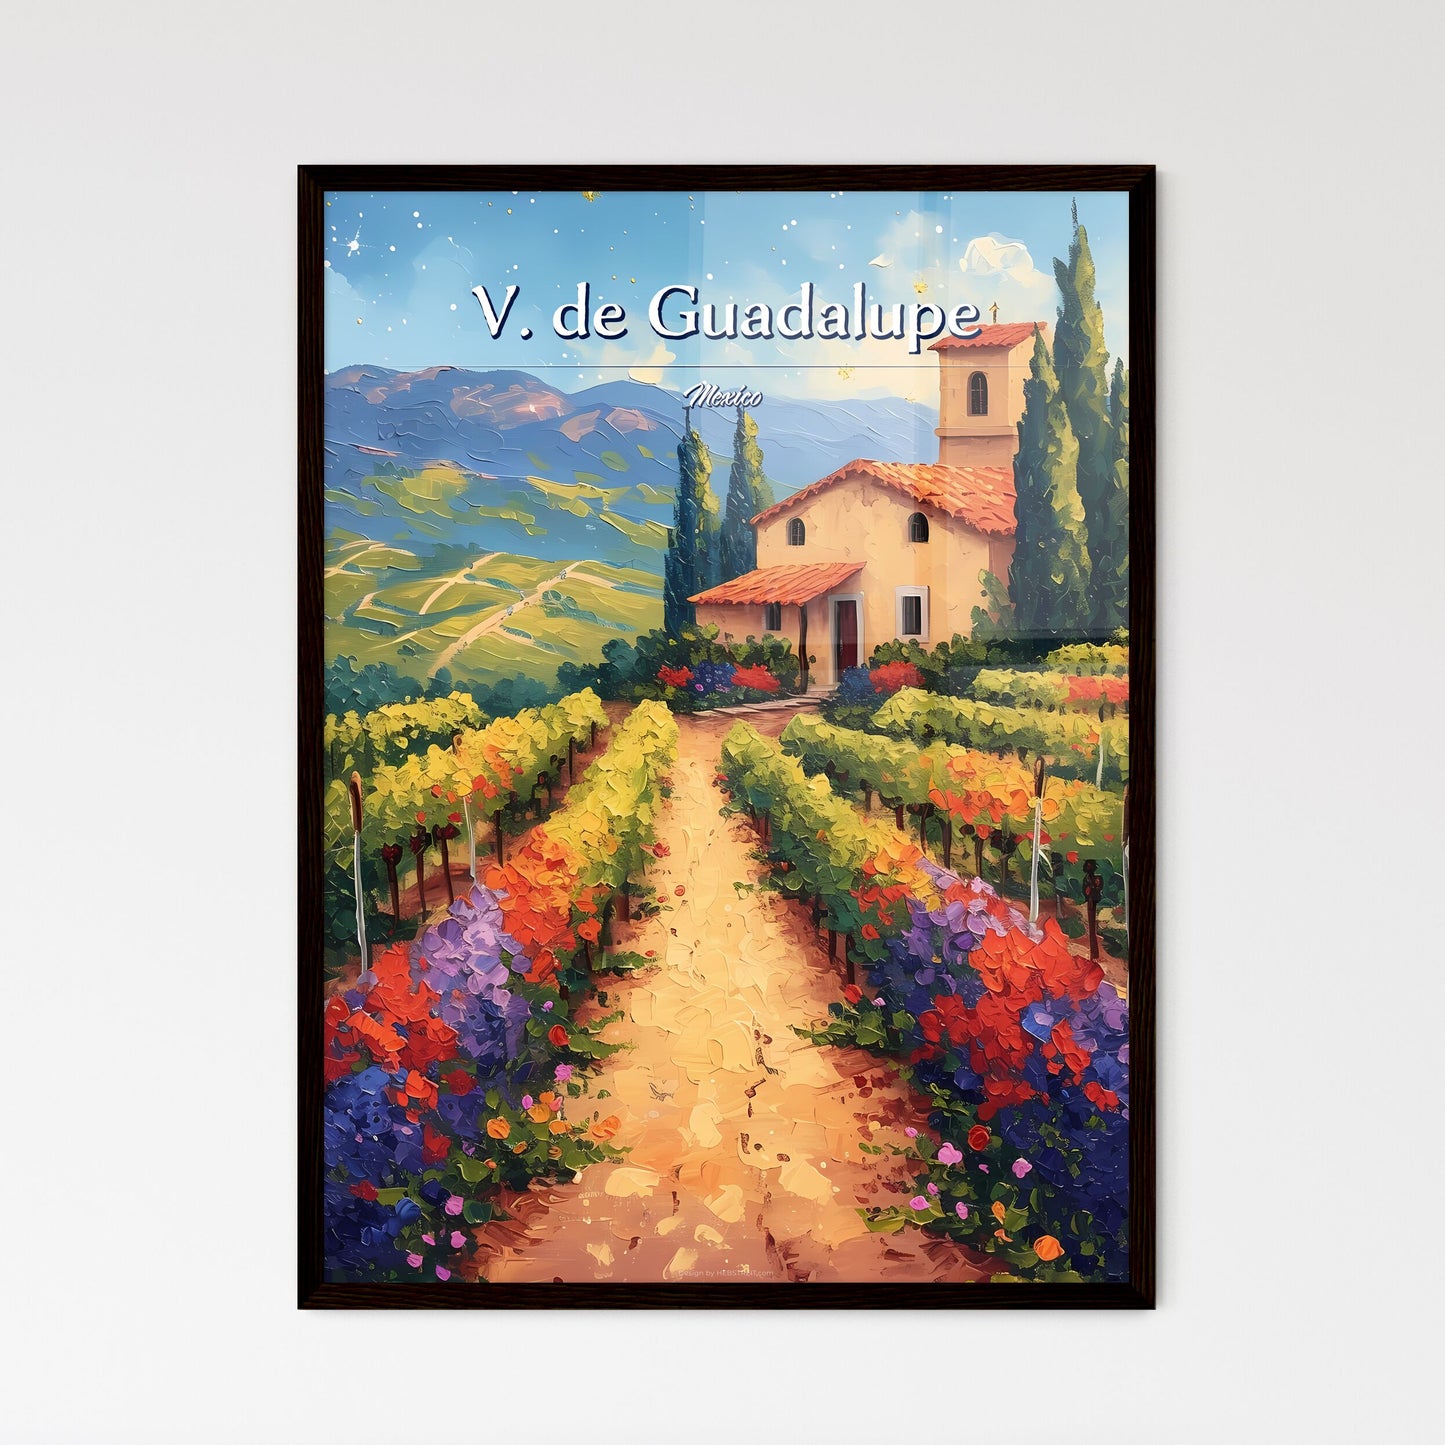 V. de Guadalupe, Mexico - Art print of a painting of a house in a vineyard Default Title